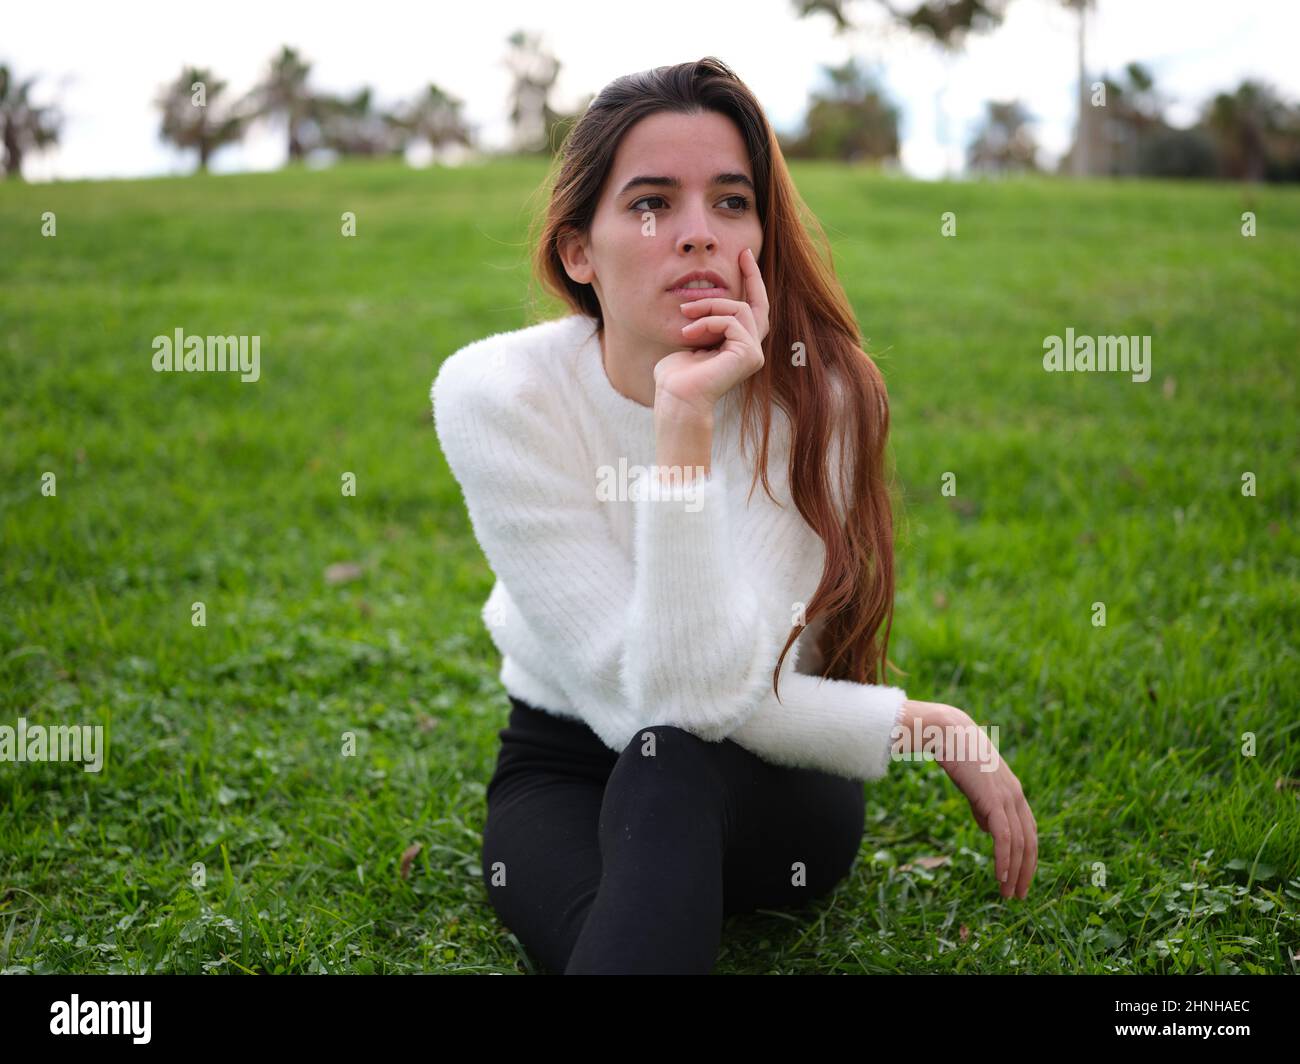 A thoughtful young woman sitting on the grass in the park propping face with hand and looking away Stock Photo